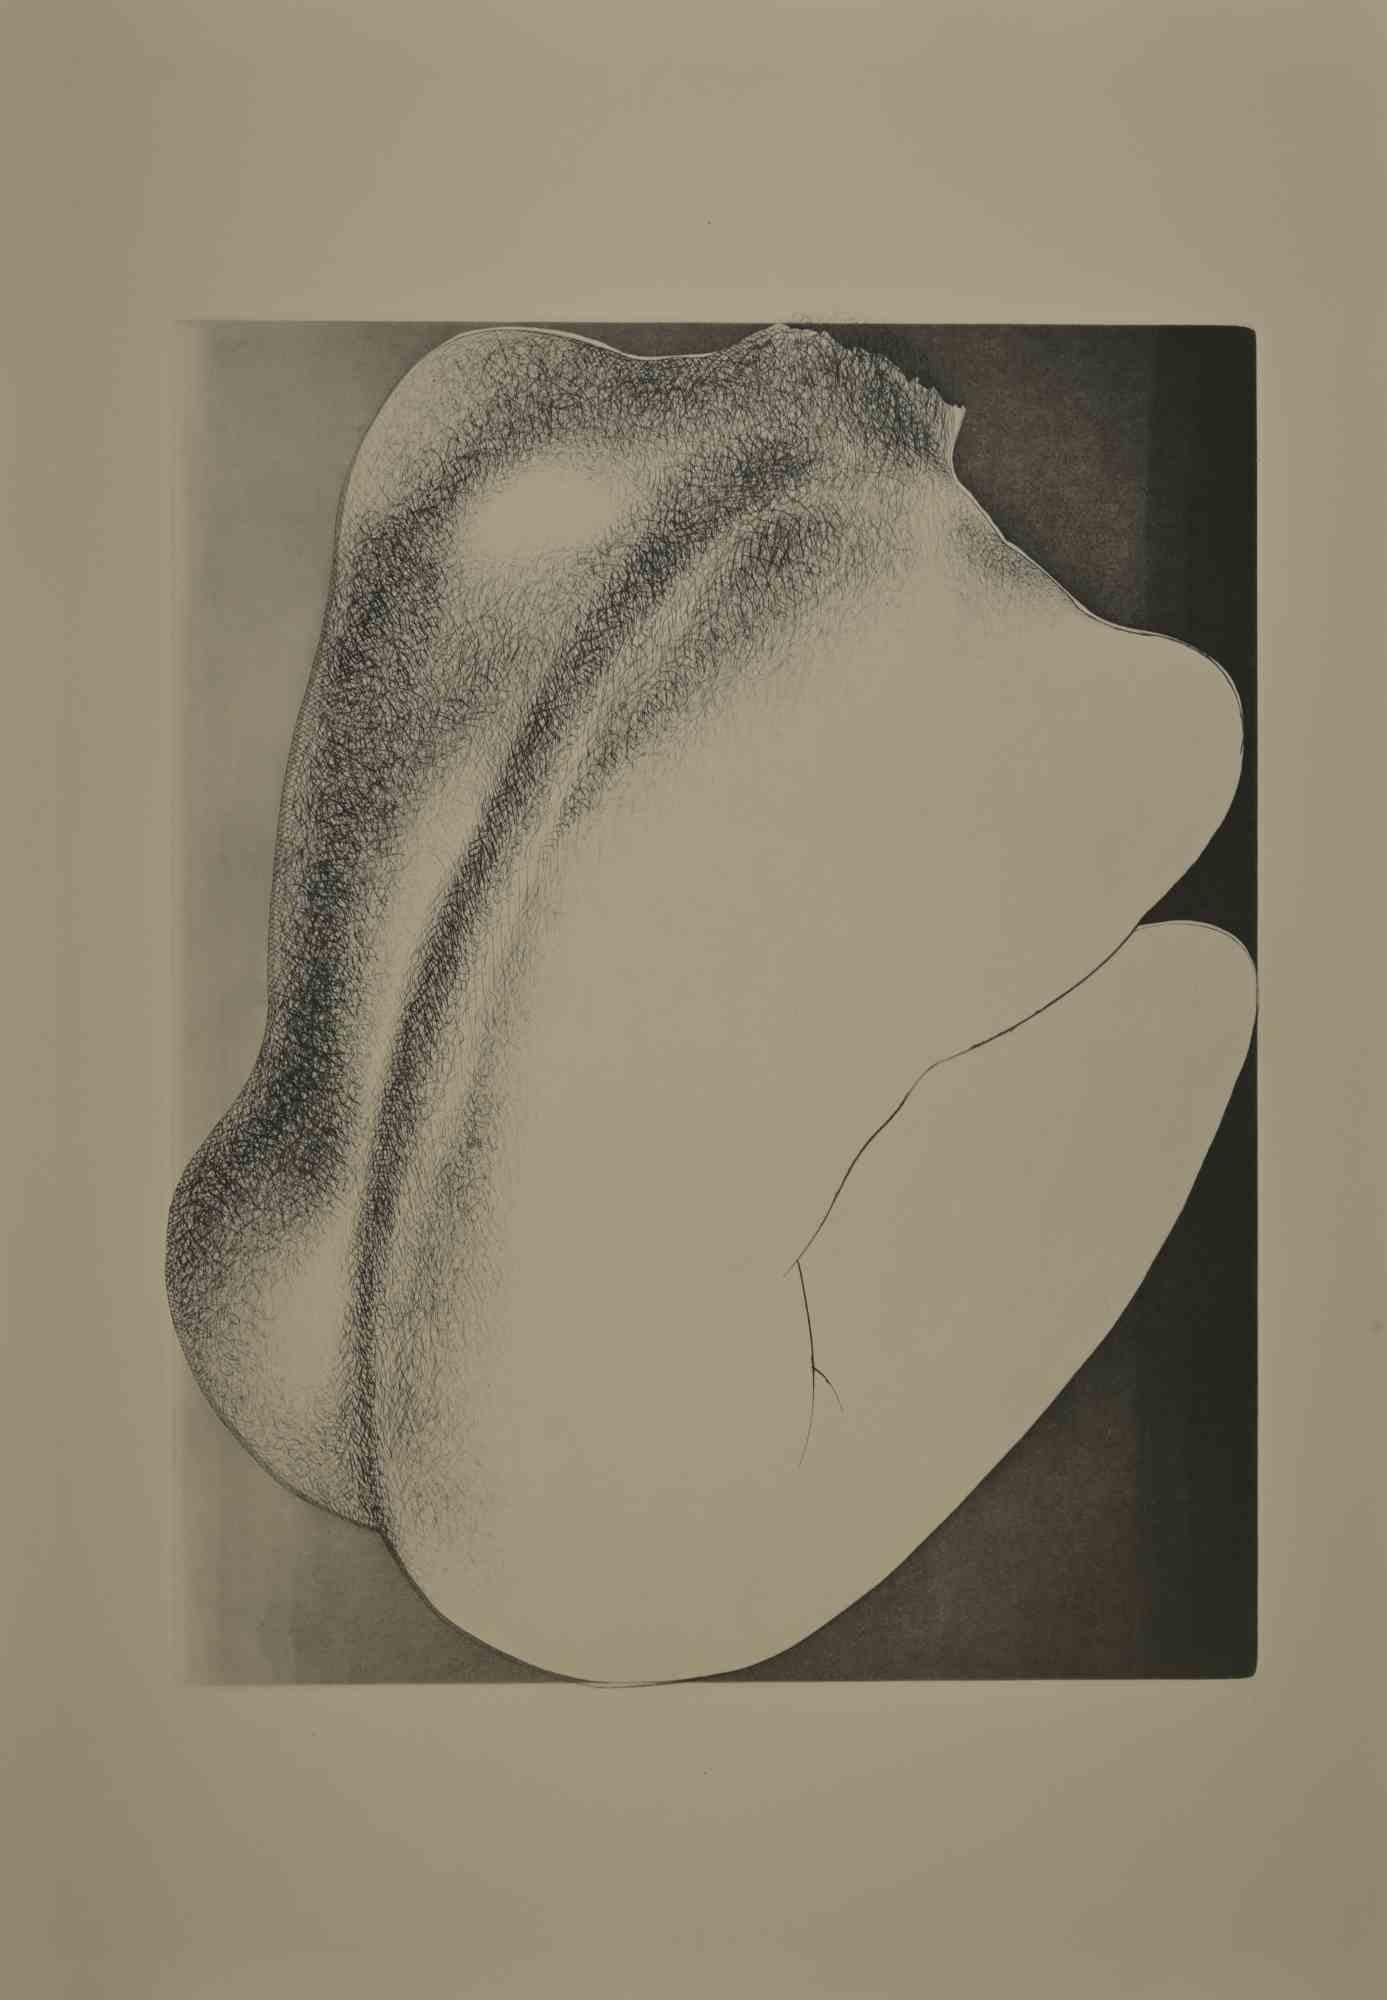 Woman from the Back is a black and white etching on paper, realized by the Italian artist  Giacomo Porzano (1925-2006).

Sheet dimension:75 x 53 cm

In good condition.

This contemporary piece representing the back of a nude woman, with strong lines